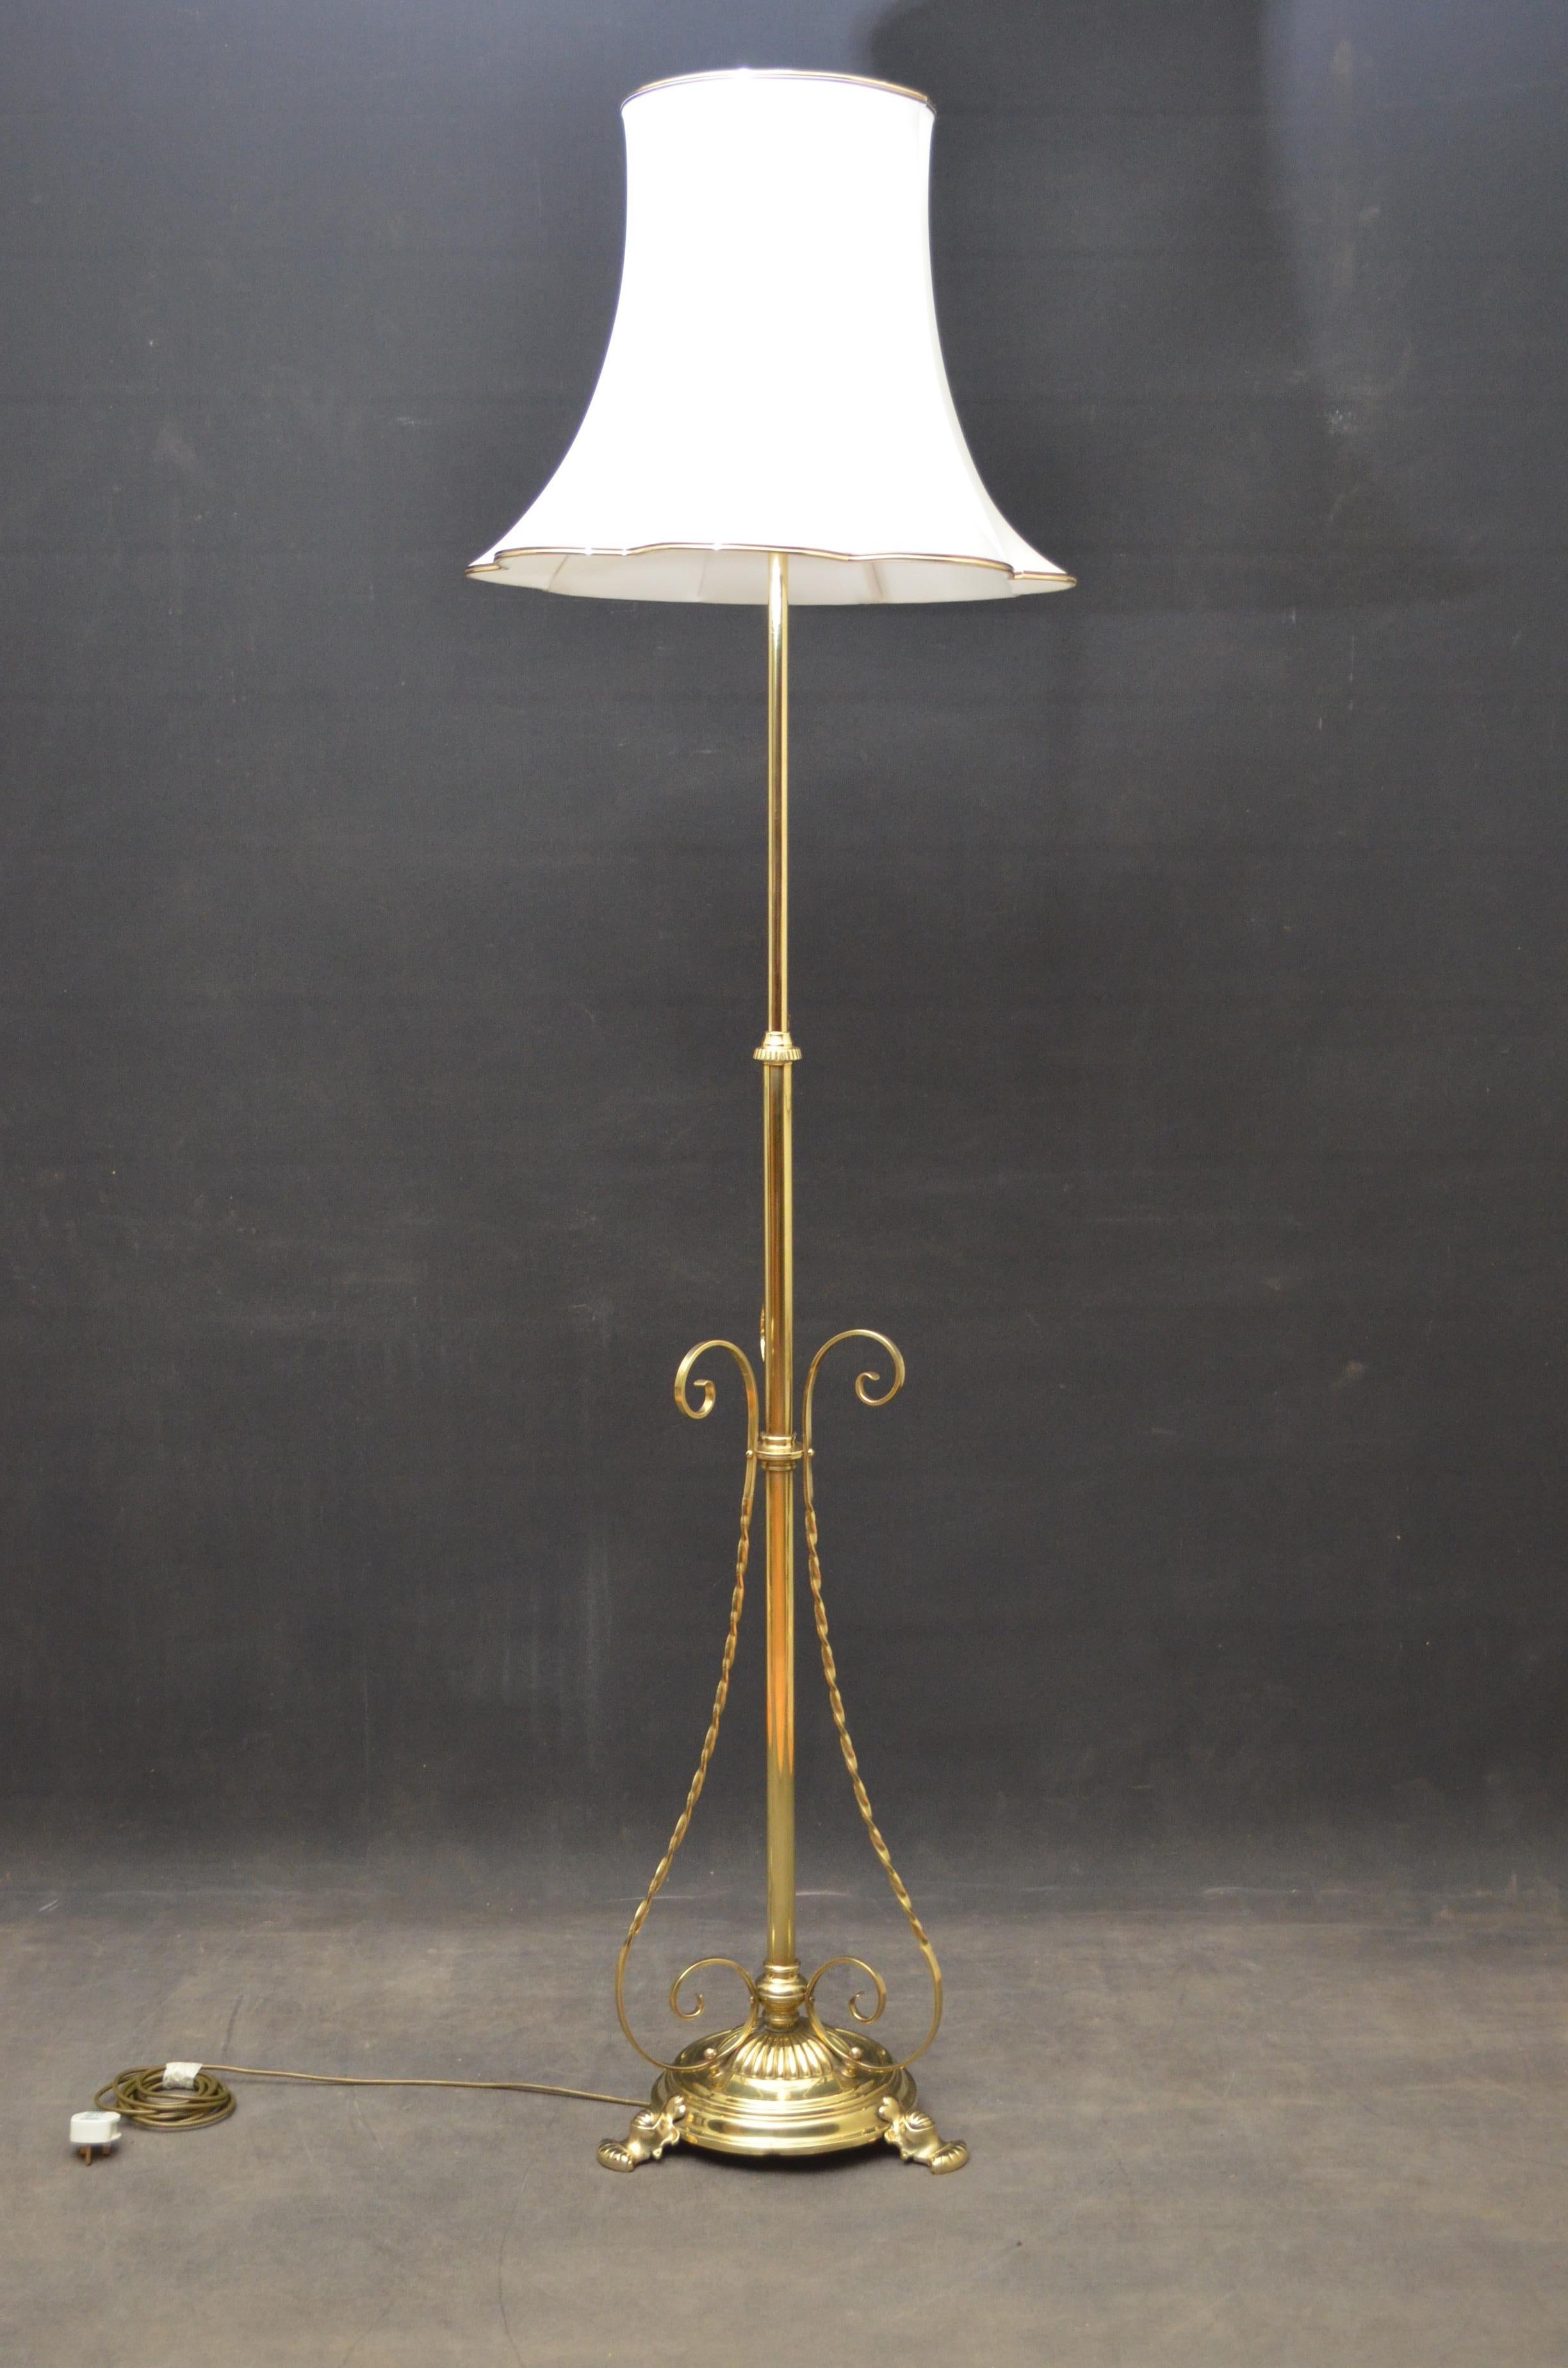 k0014 014 stylish Arts & Crafts height adjustable standard lamp on fluted circular base, decorative twisted supports and pad feet. This antique lamp has been PAT tested and is ready to use. Lampshade not included but it is available and ca be